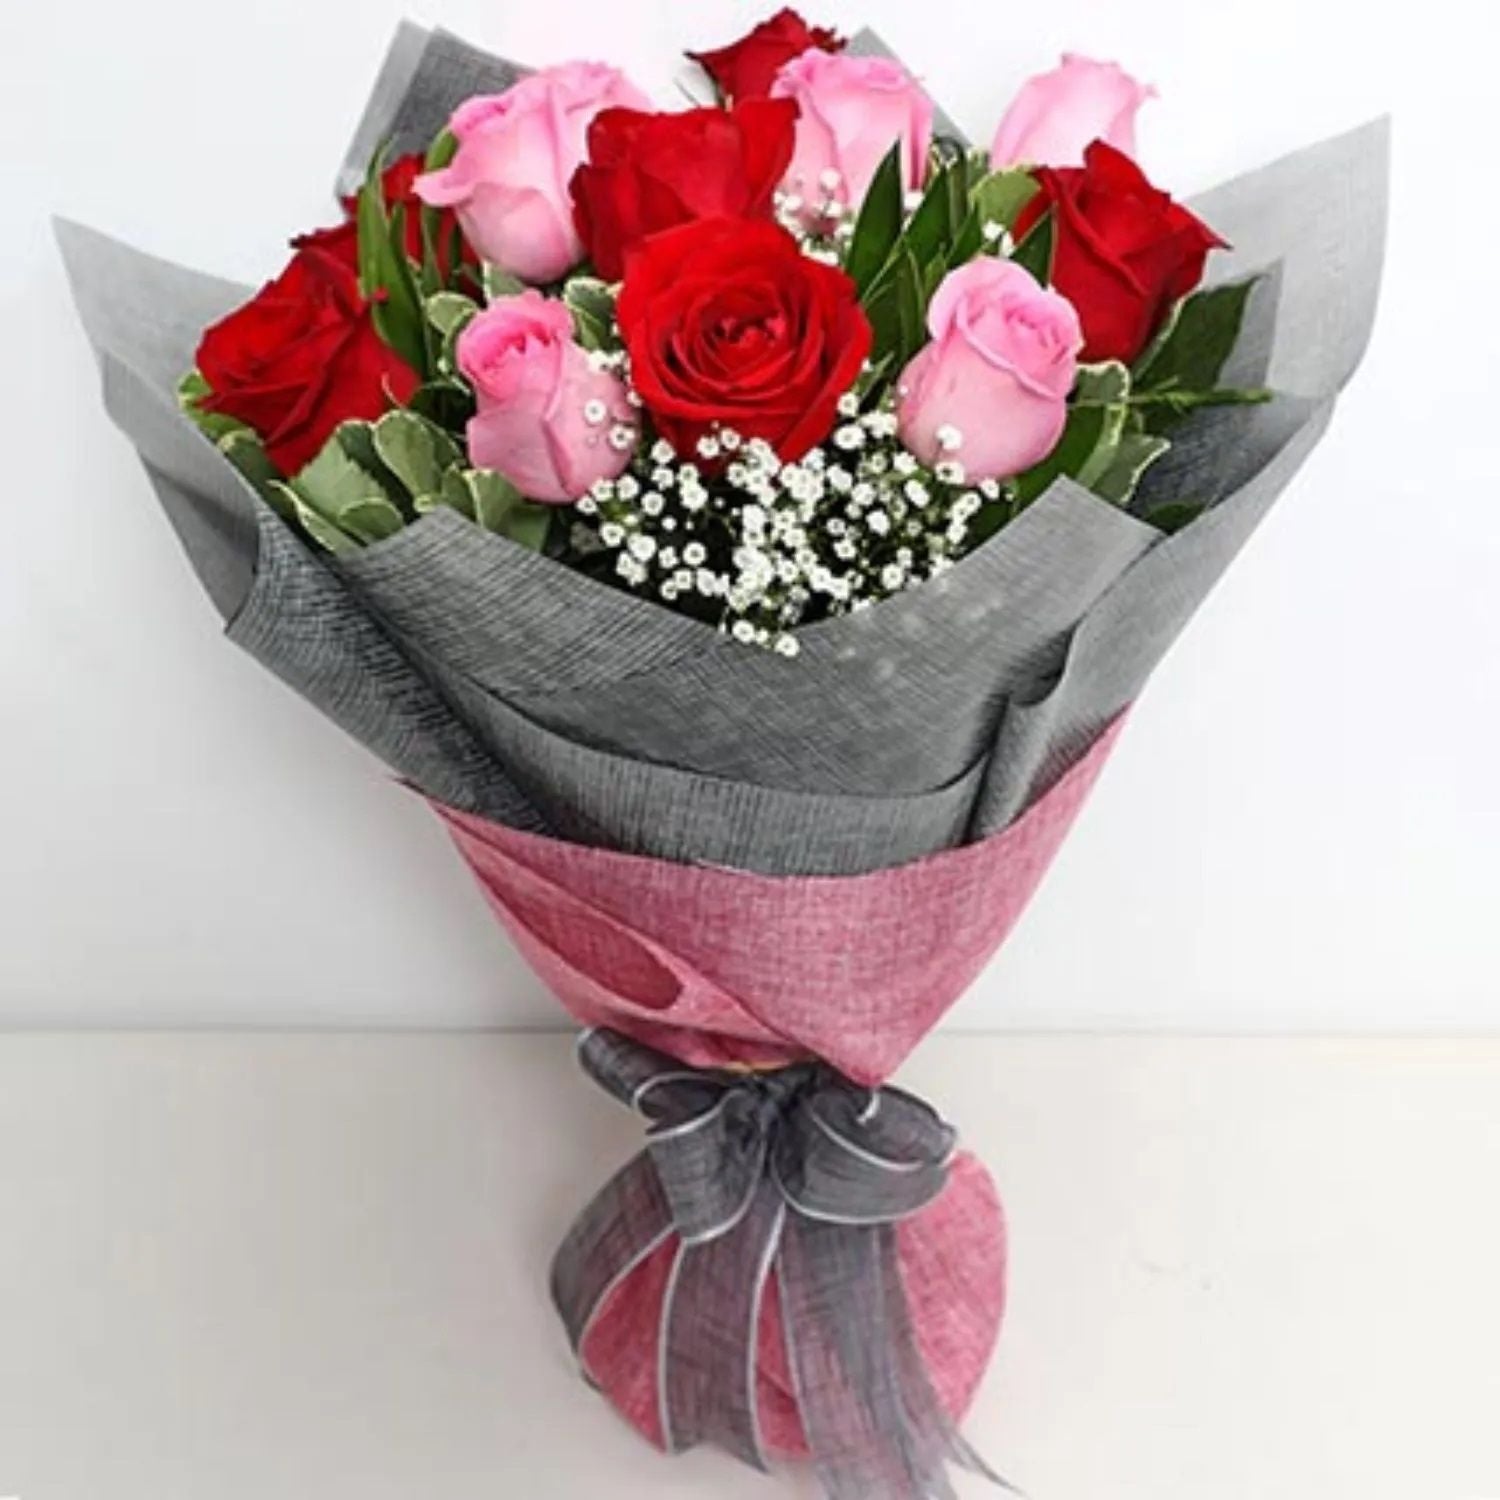 12 Mix Roses Hand Bouquet